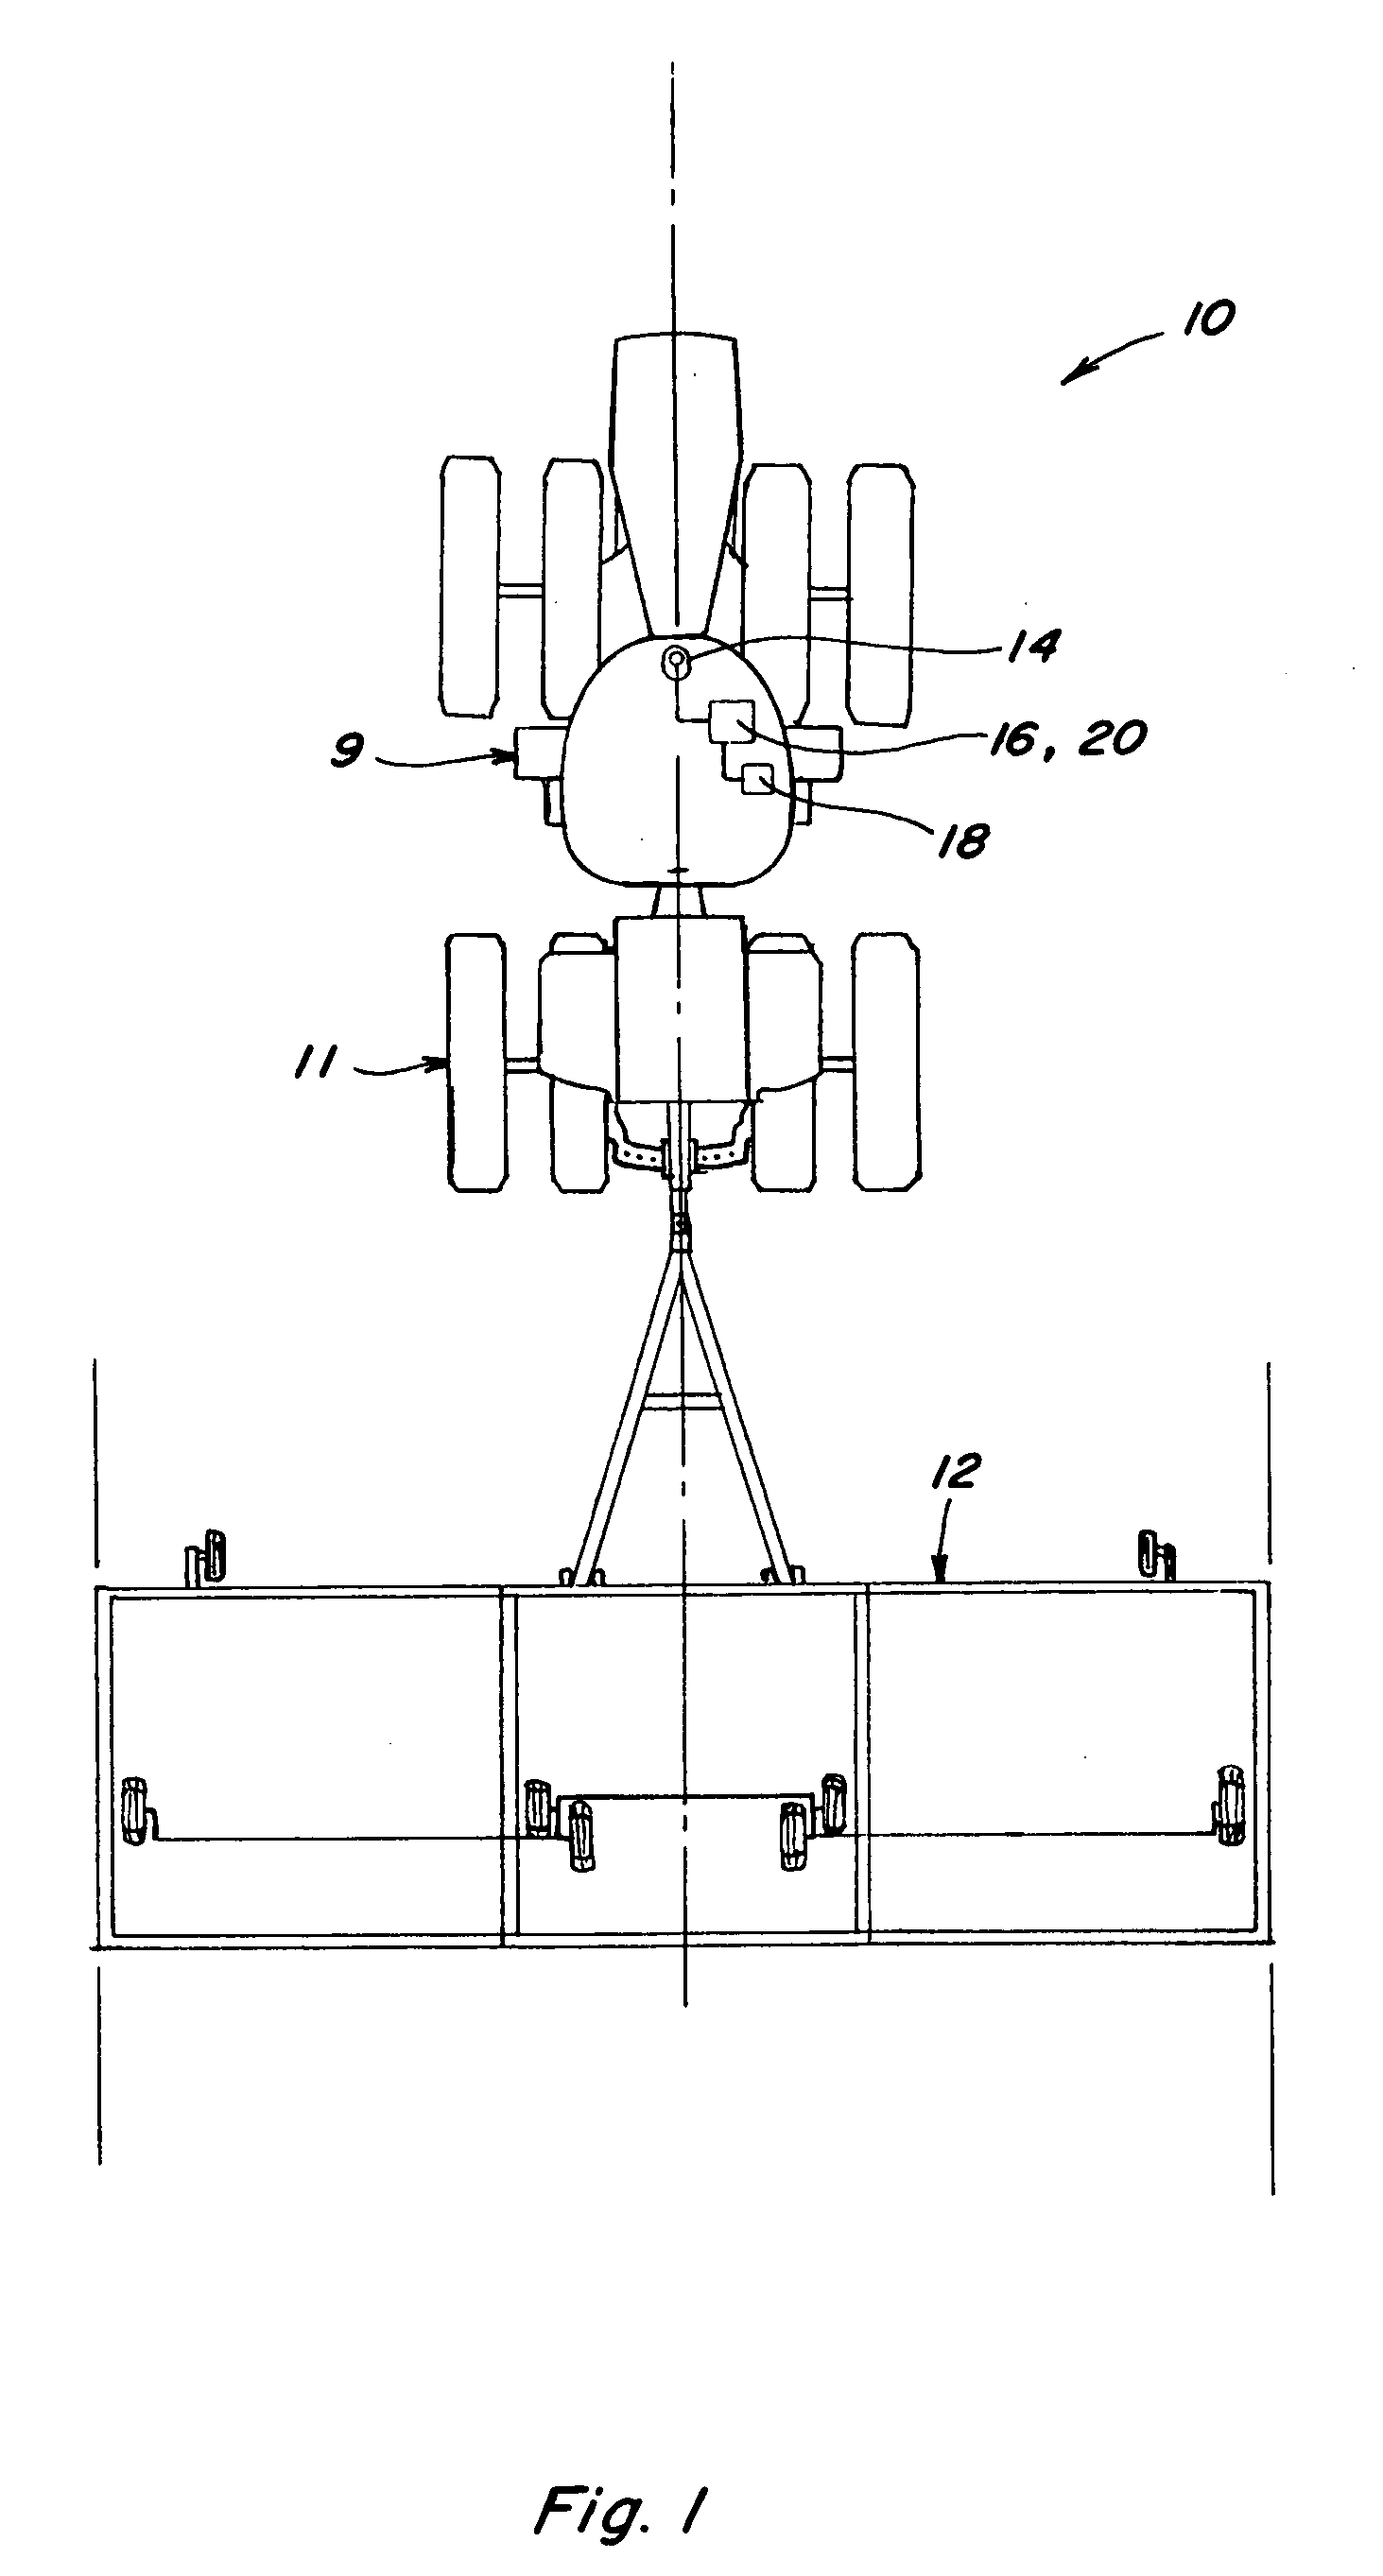 Swath line creation including slope compensation for an automatic guidance system of a work vehicle